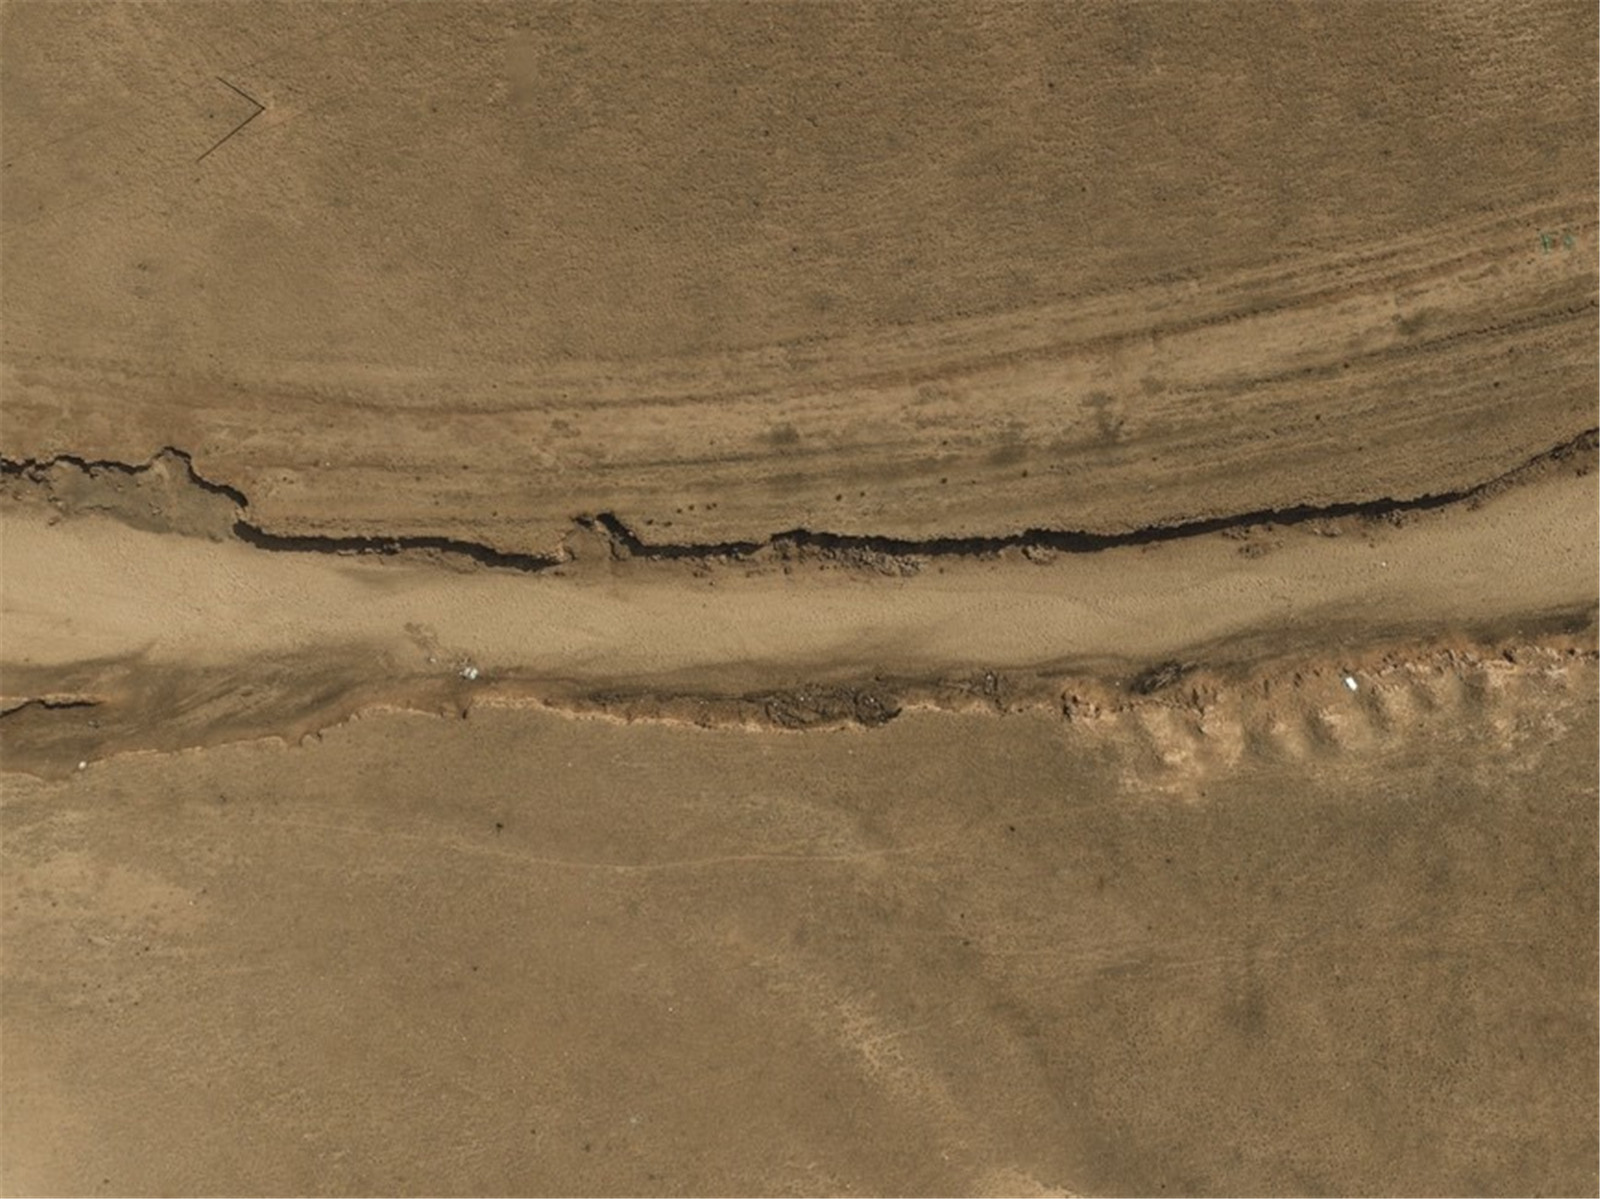 An aerial shot of a dry river eroded by sand and dust.